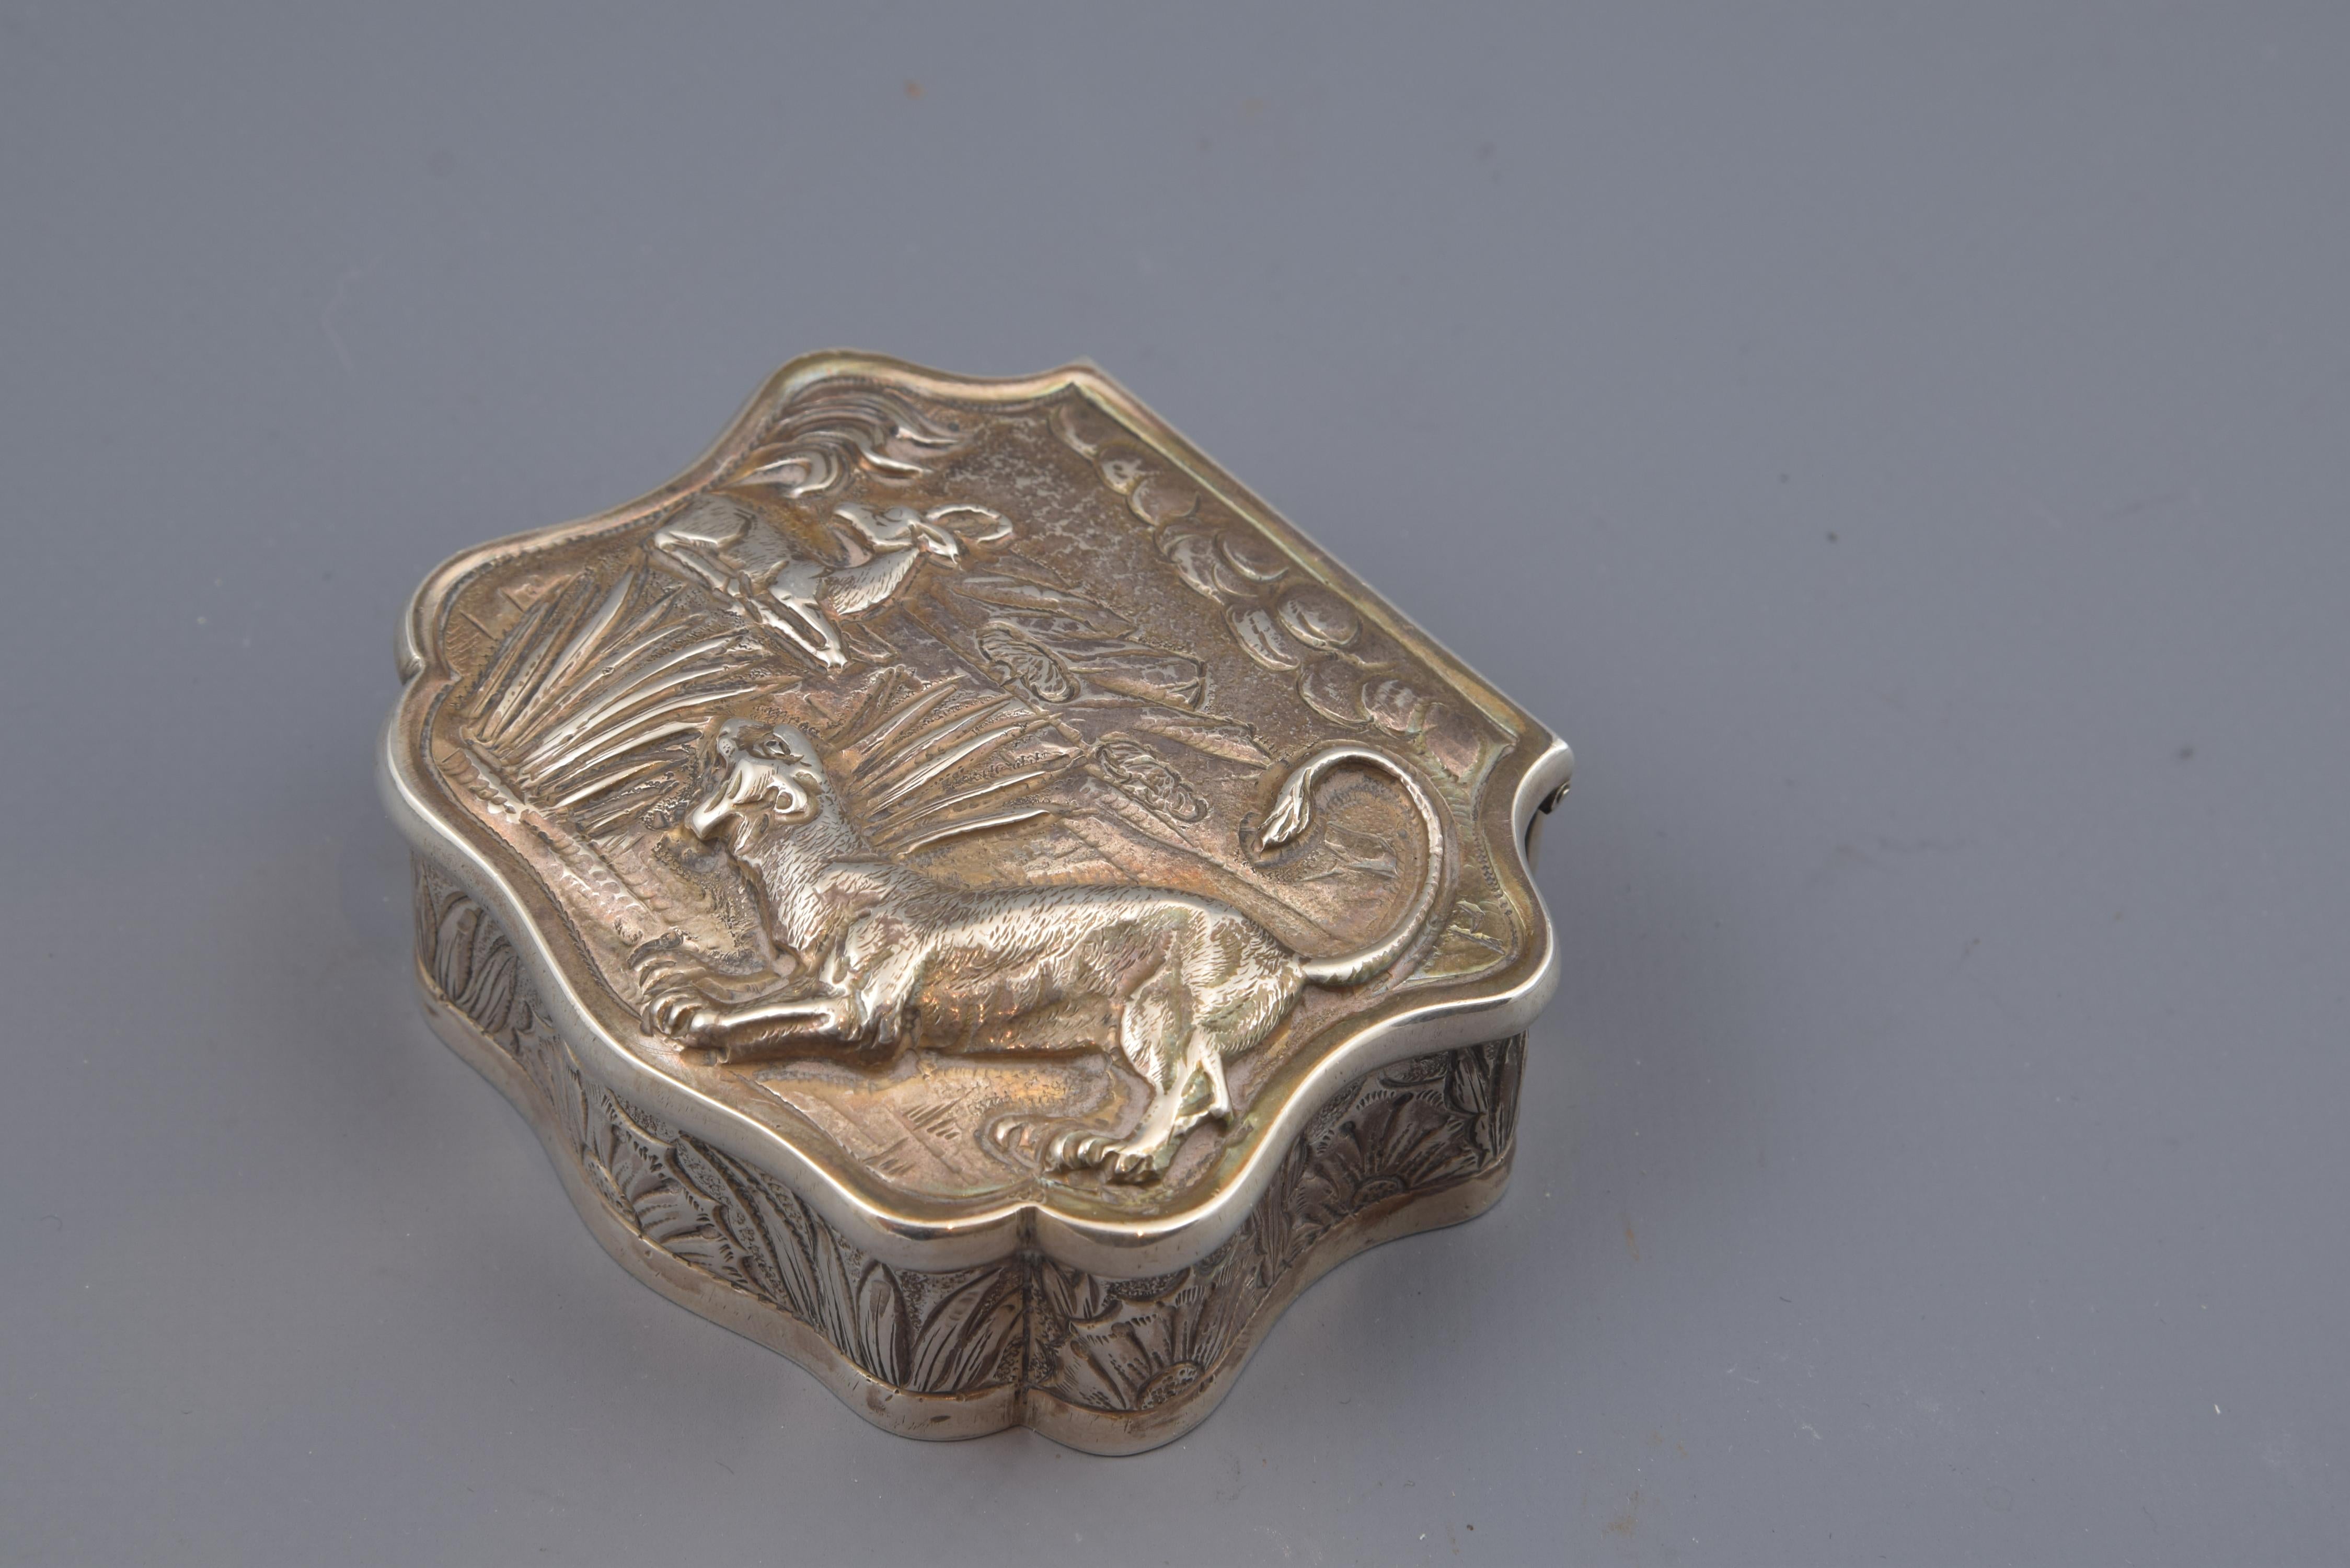 Box made of silver with flat lid and corrugated edges (except for the back, for the hinge), which has a decoration of plant elements on the edge flanked by a smooth molding to enhance them. The same is done at the top, highlighting a natural scene